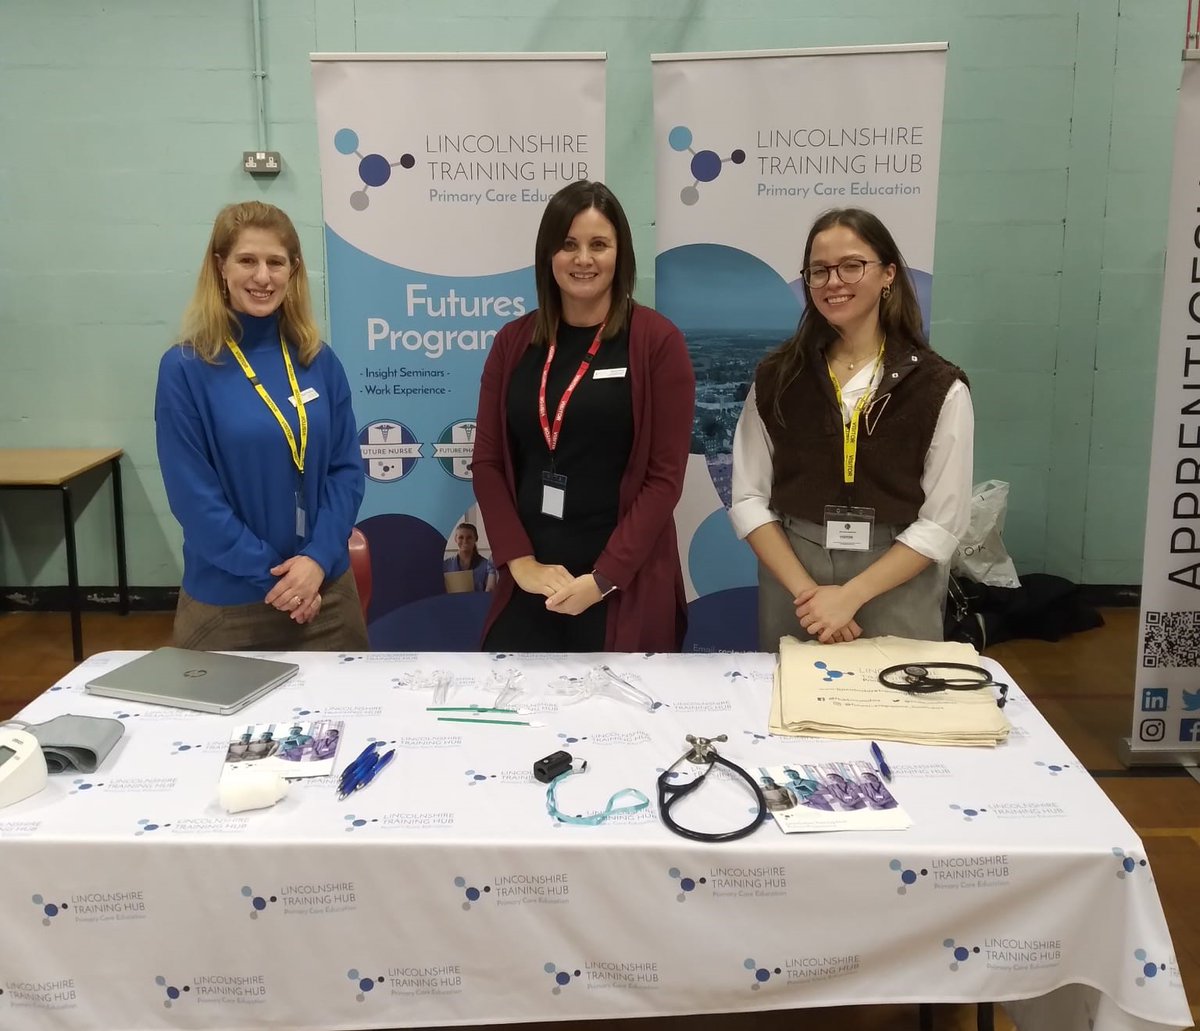 Ruth, Stacey and Ruta have attended the Lincoln Christ's Hospital School careers fair today to encourage students from year 9 to take up a career in healthcare. #healthcare #careersfair #primarycare